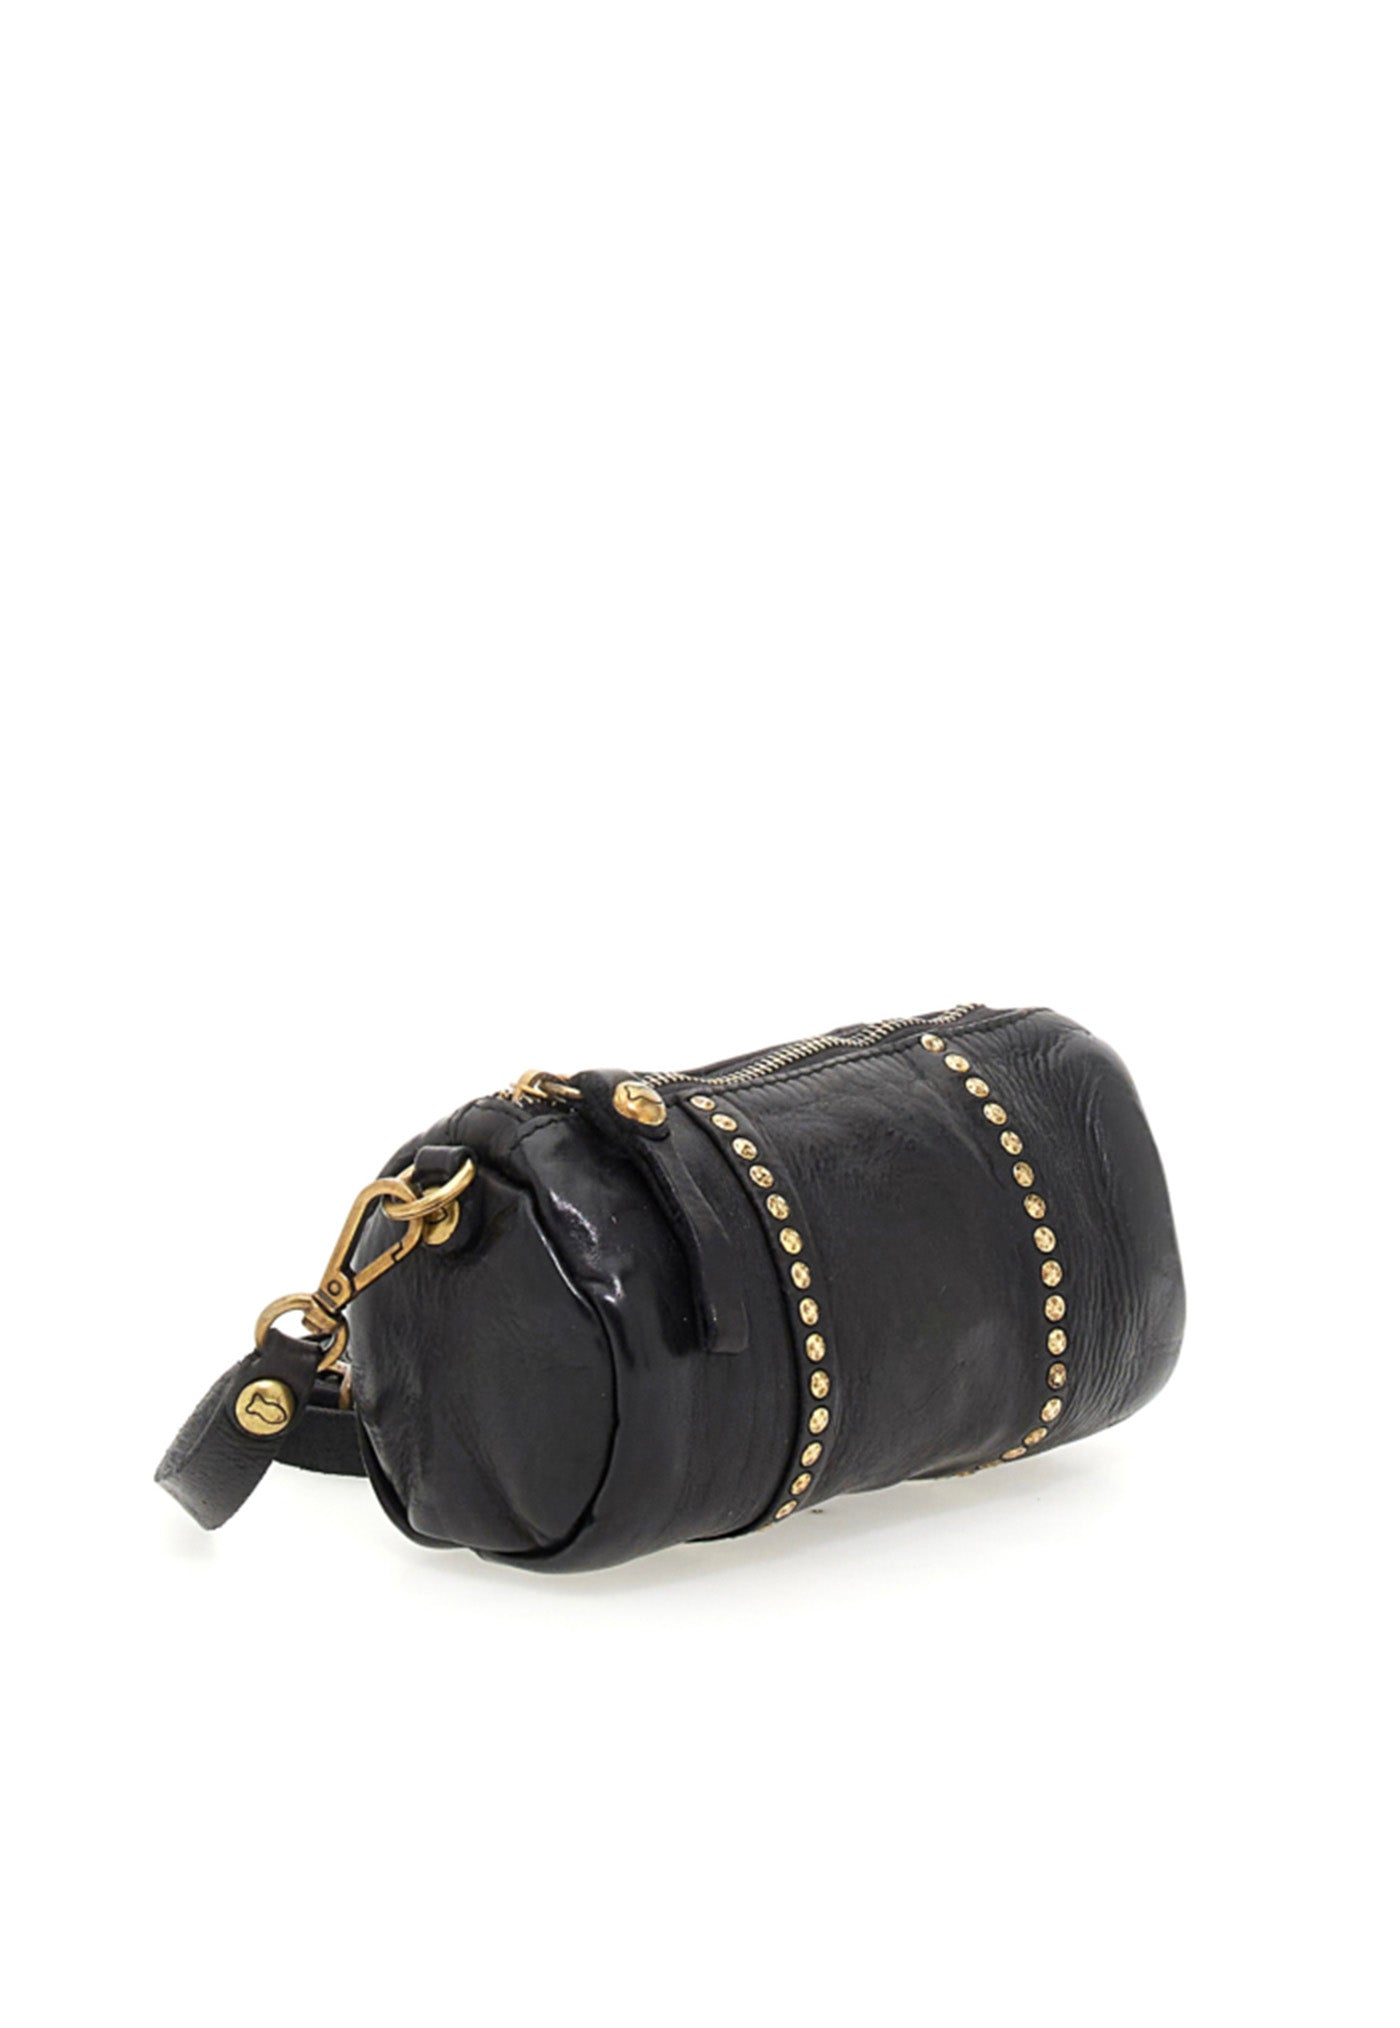 Studded Small Crossbody Bag - Black sold by Angel Divine